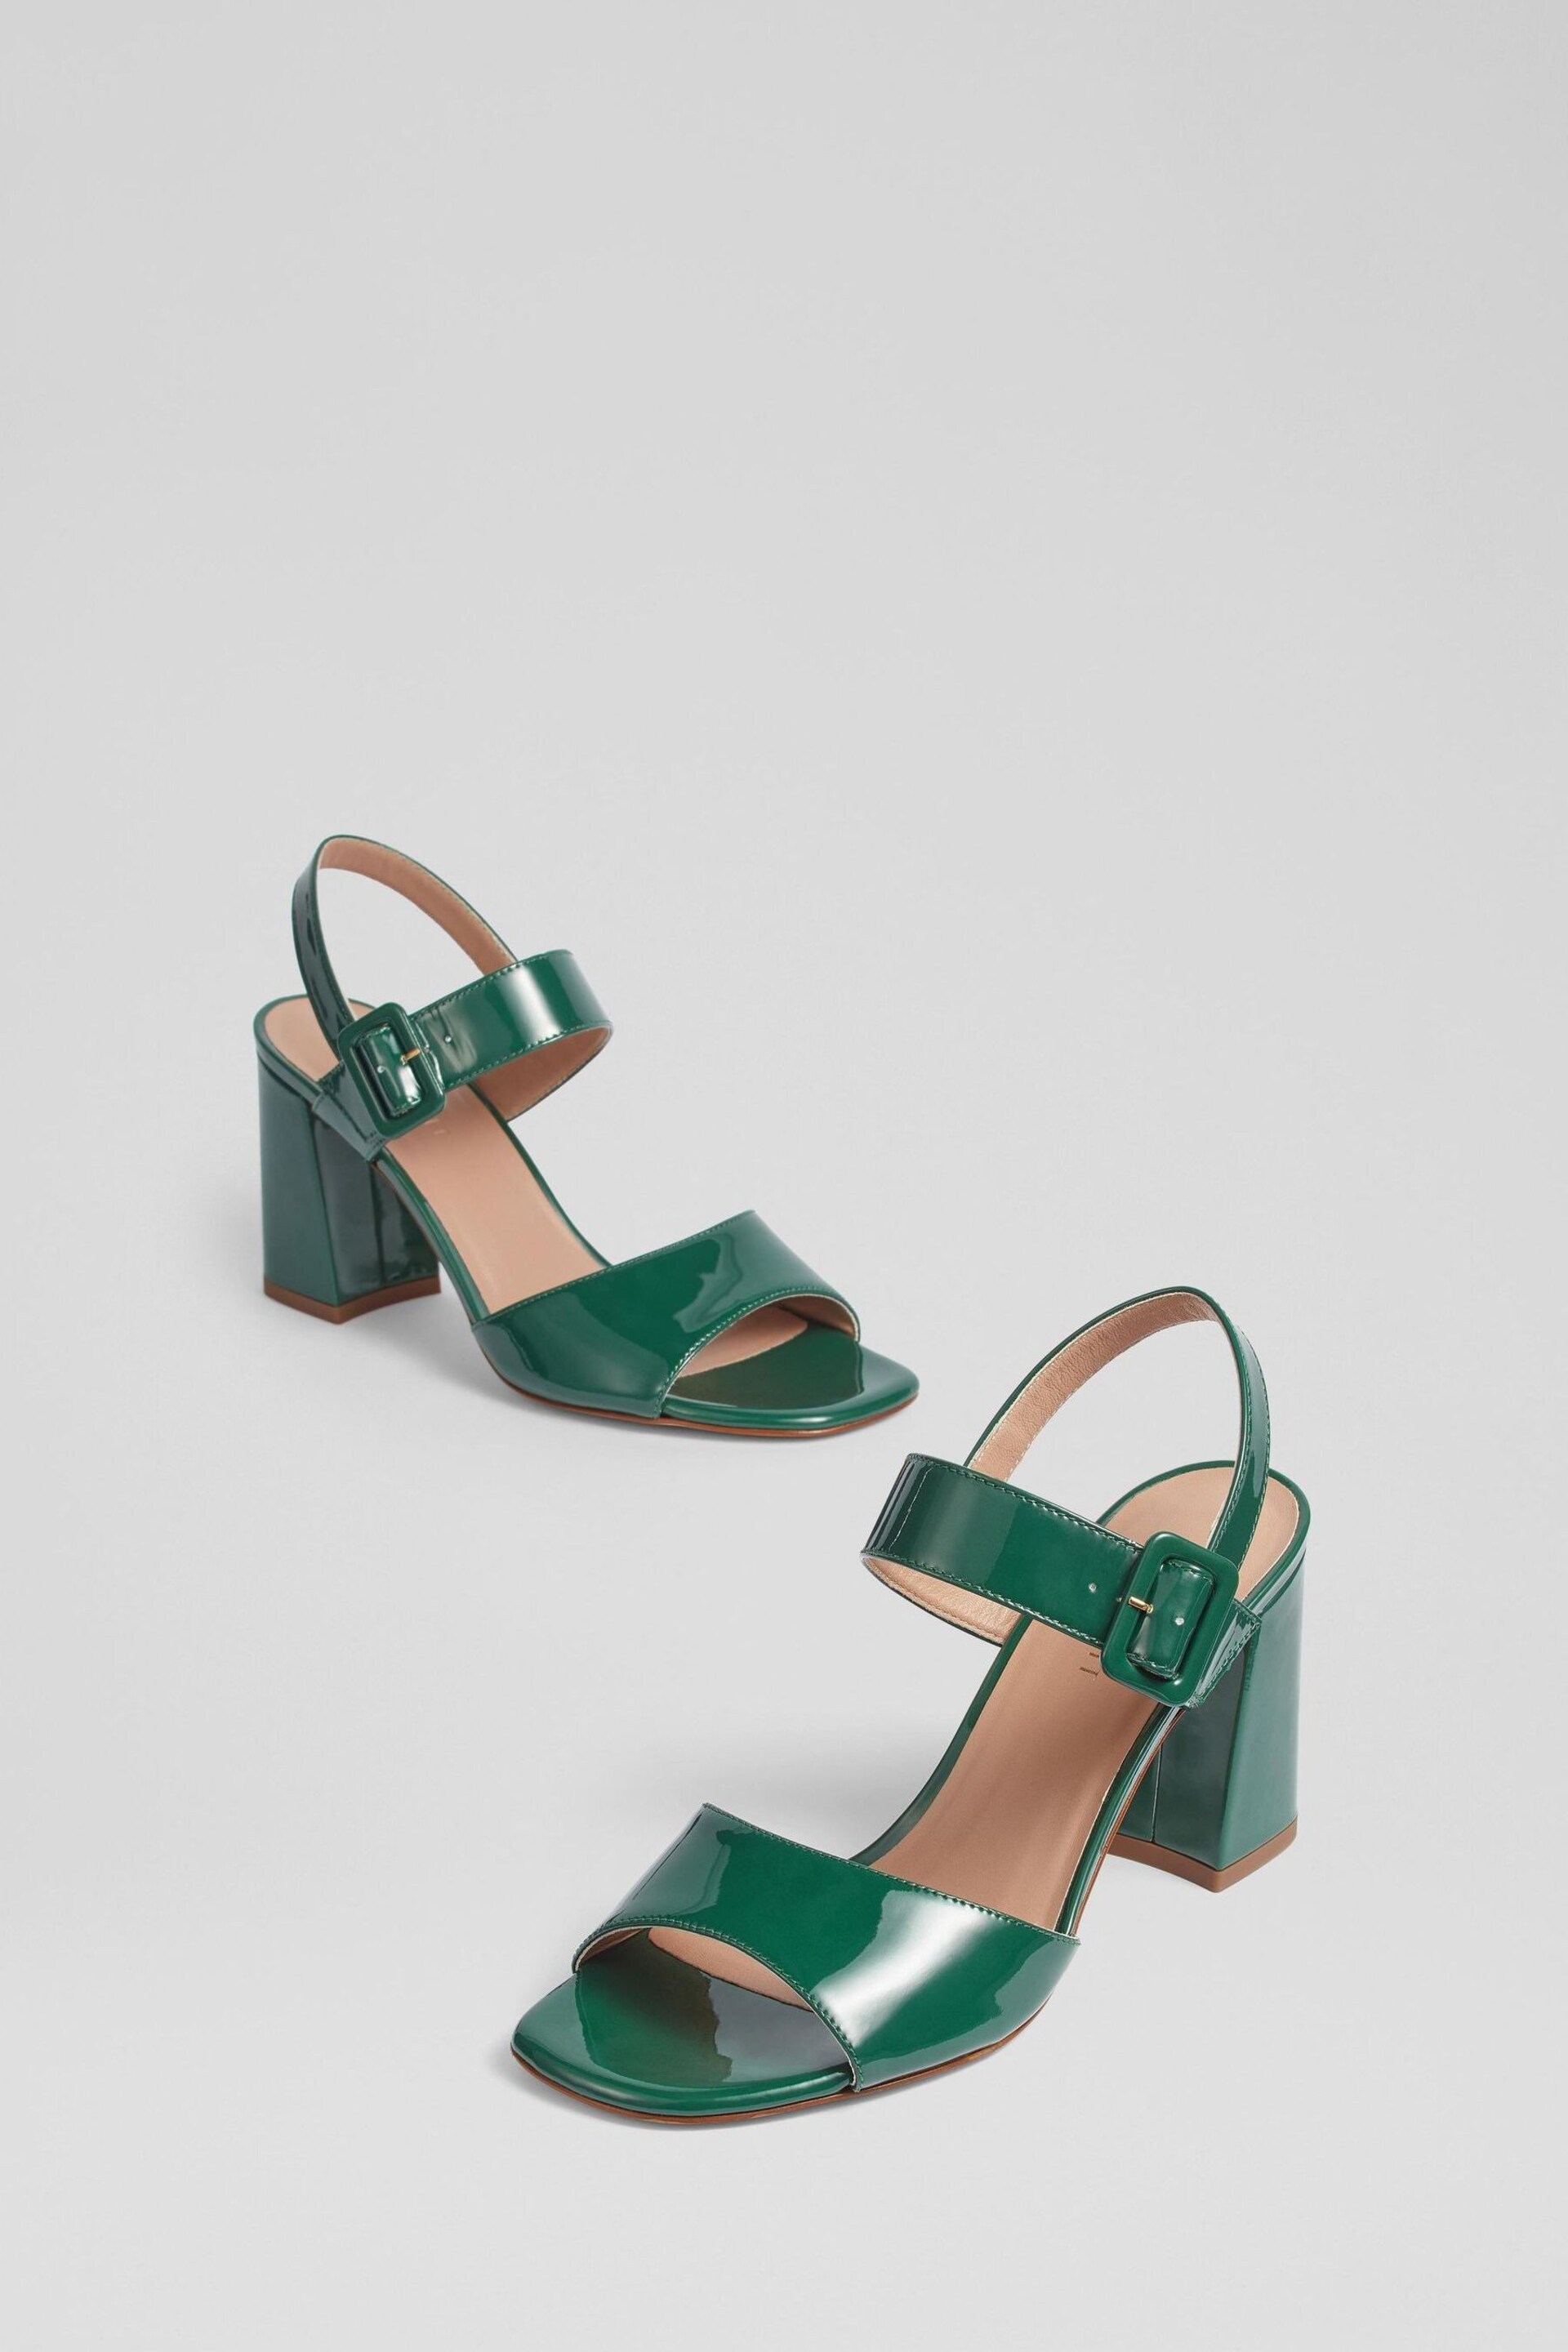 LK Bennett Rae Patent Leather Large Buckle Sandals - Image 3 of 3